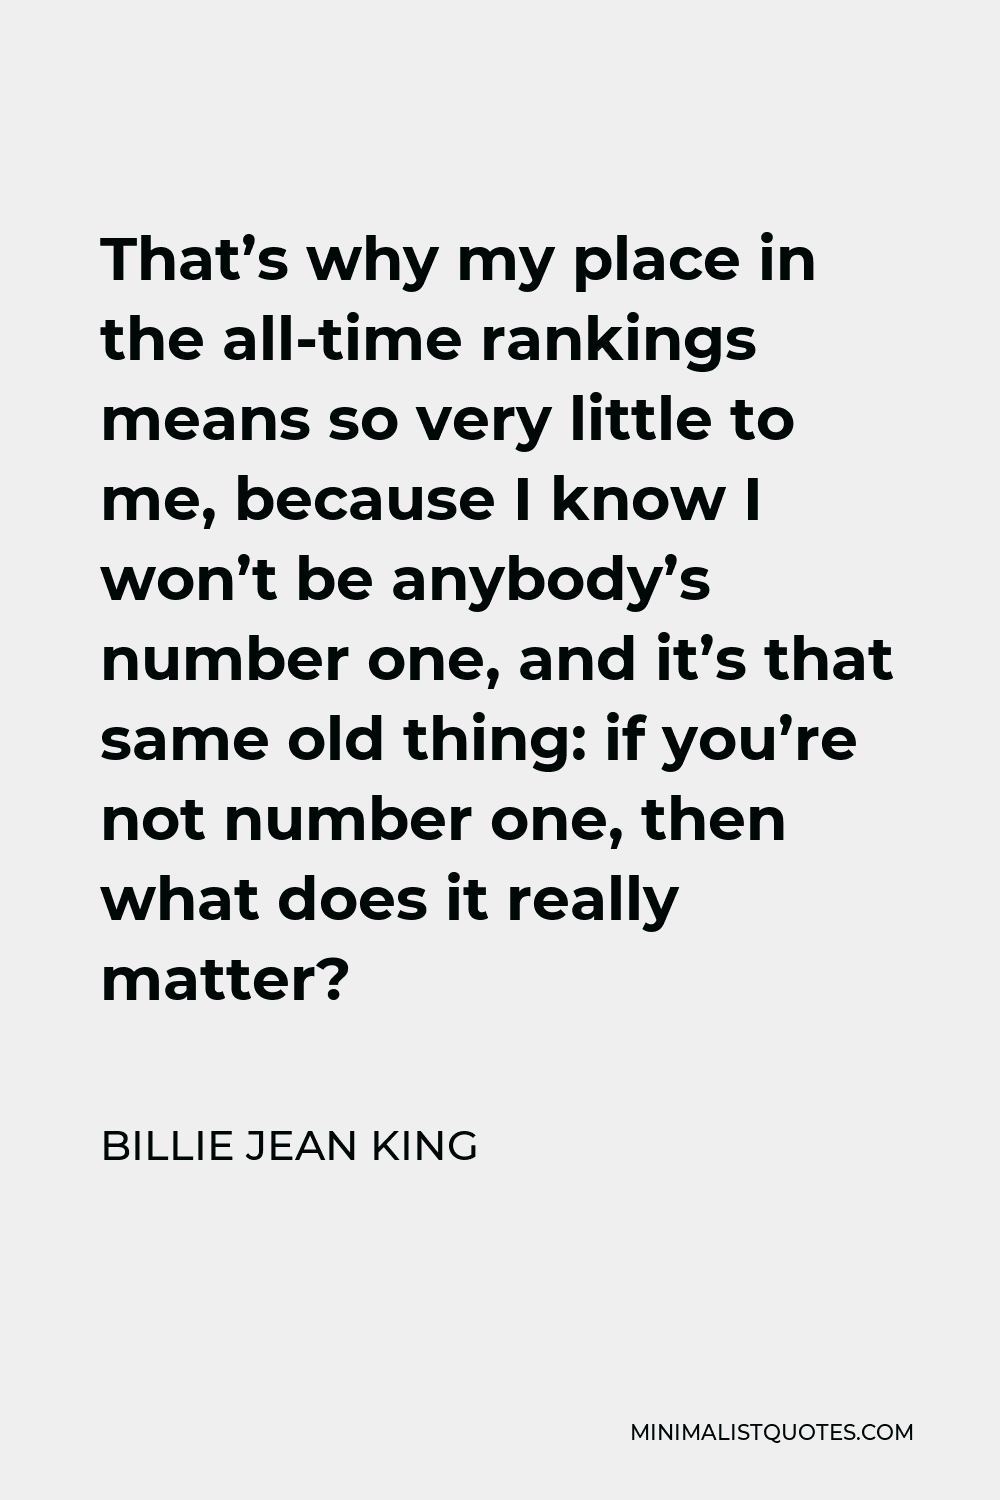 Billie Jean King Quote - That’s why my place in the all-time rankings means so very little to me, because I know I won’t be anybody’s number one, and it’s that same old thing: if you’re not number one, then what does it really matter?